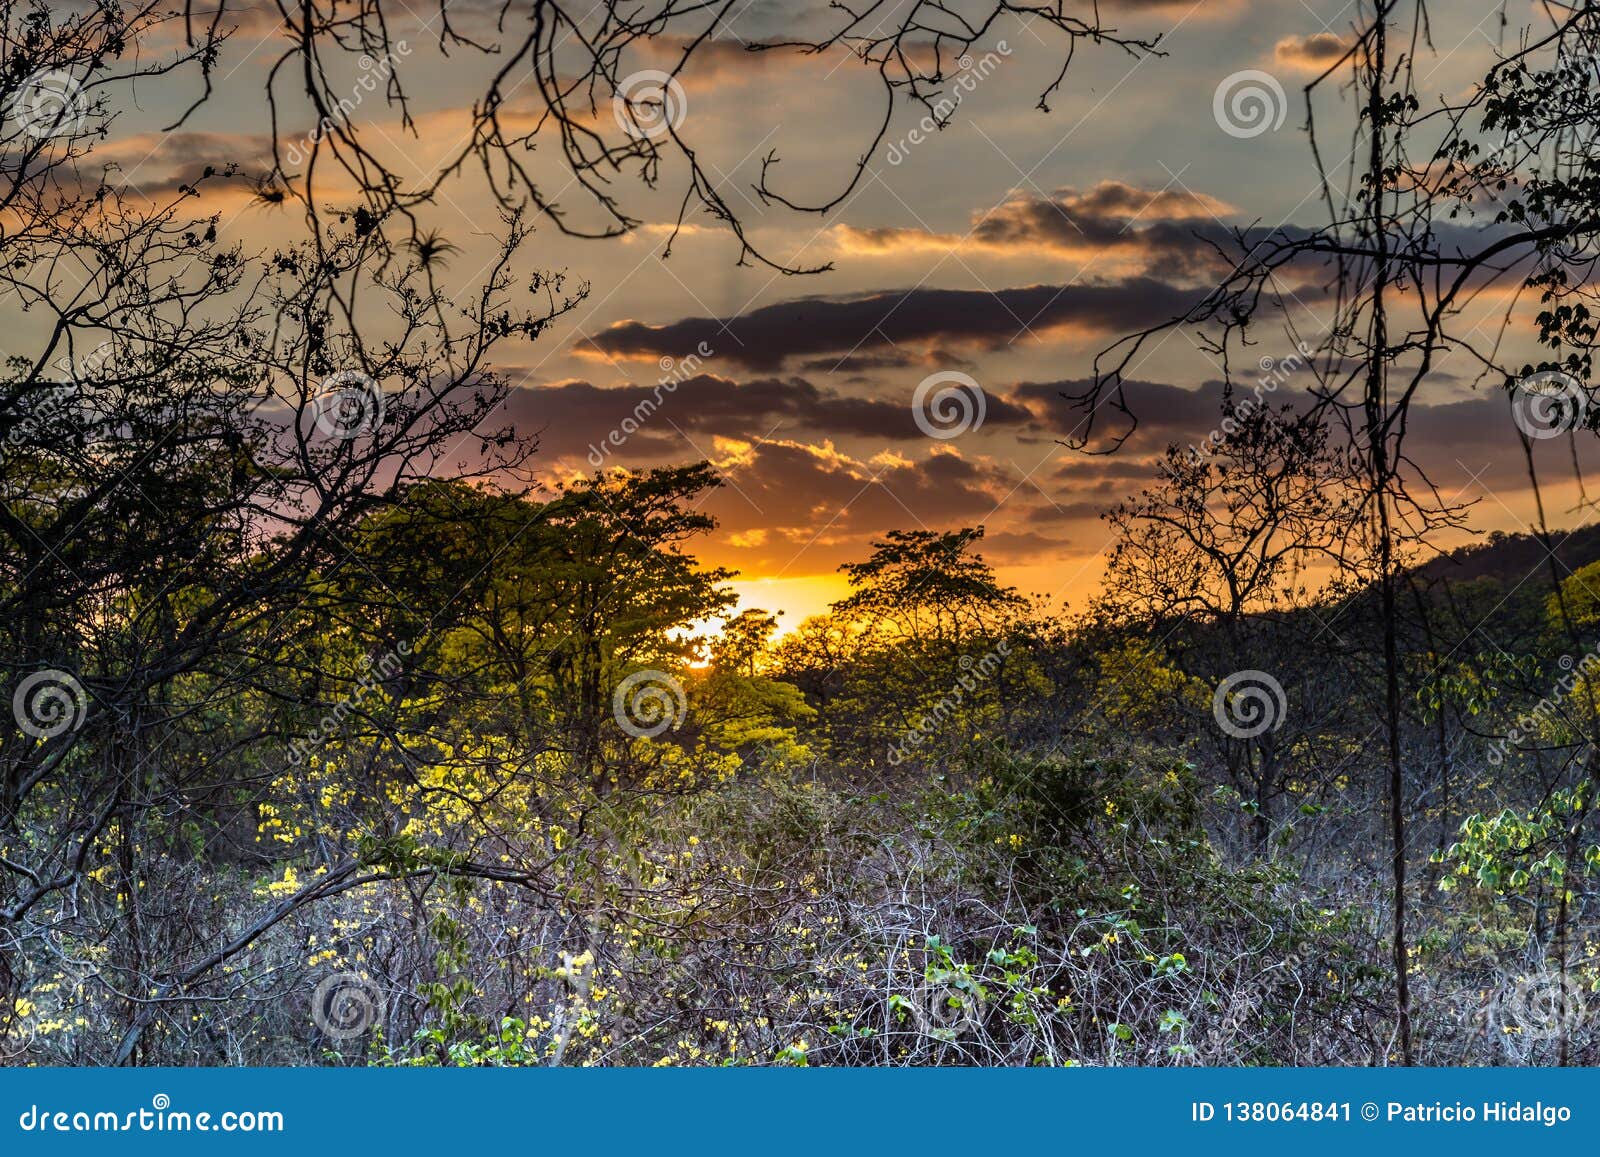 sunset in the guayacanes forest